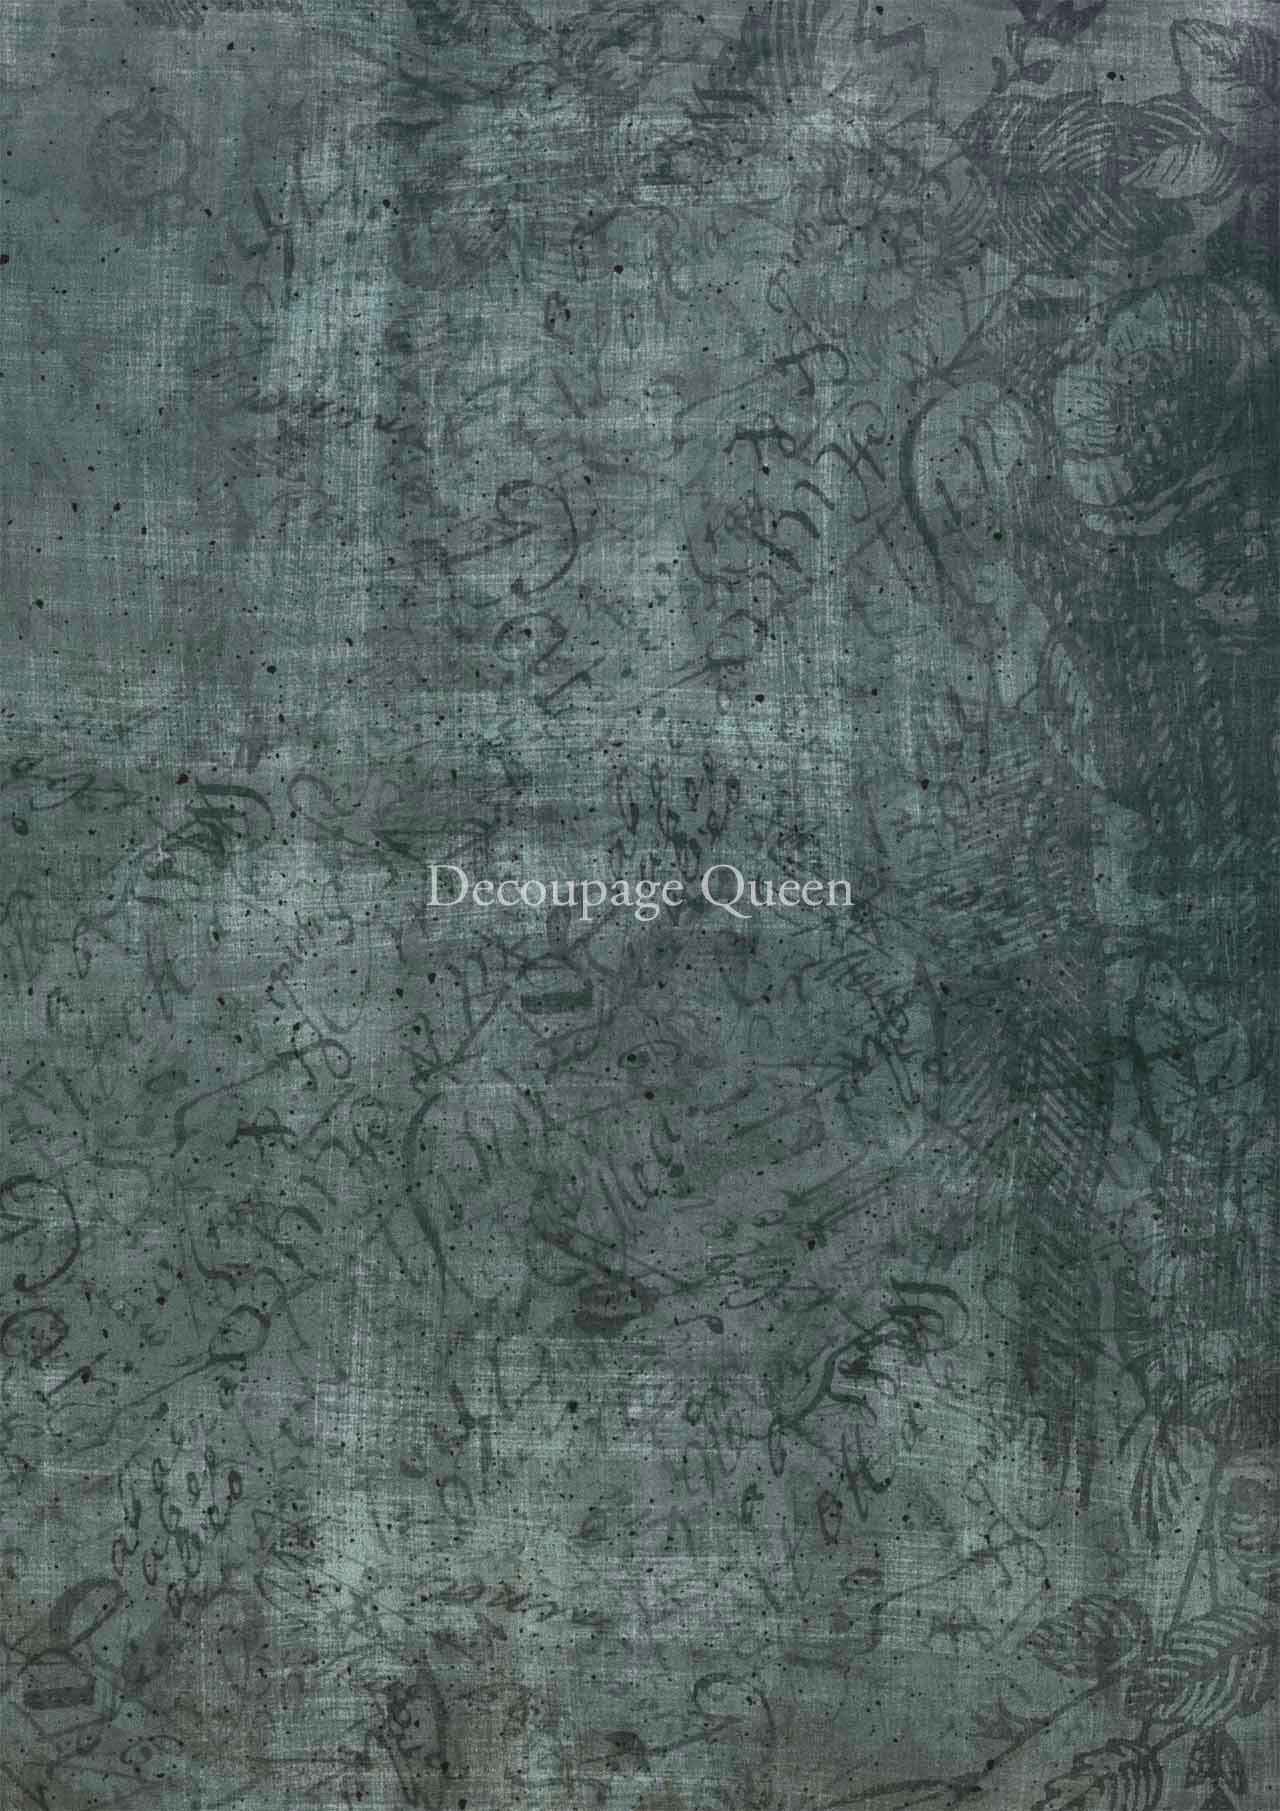 Decoupage Queen Dainty and the Queen - Threadbare